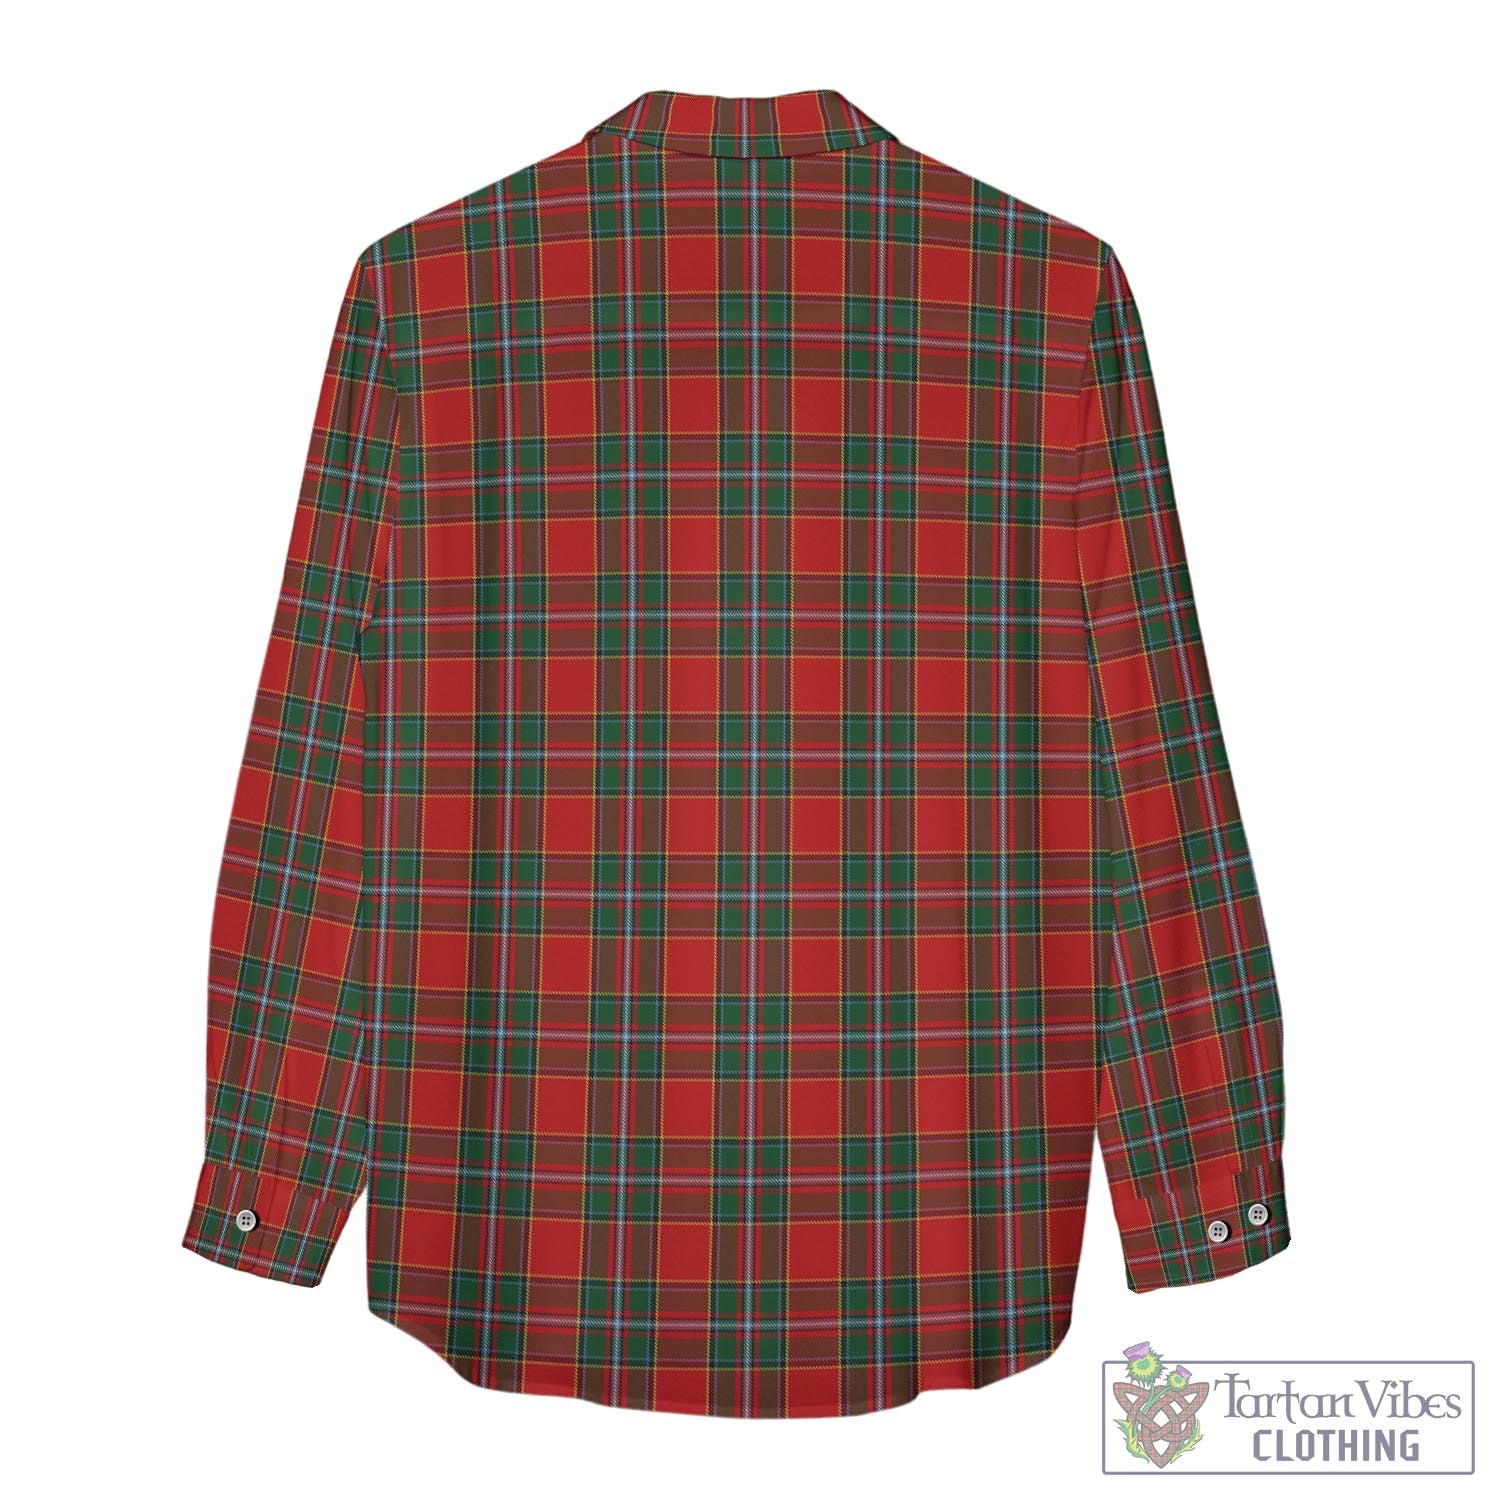 Tartan Vibes Clothing Drummond Ancient Tartan Womens Casual Shirt with Family Crest